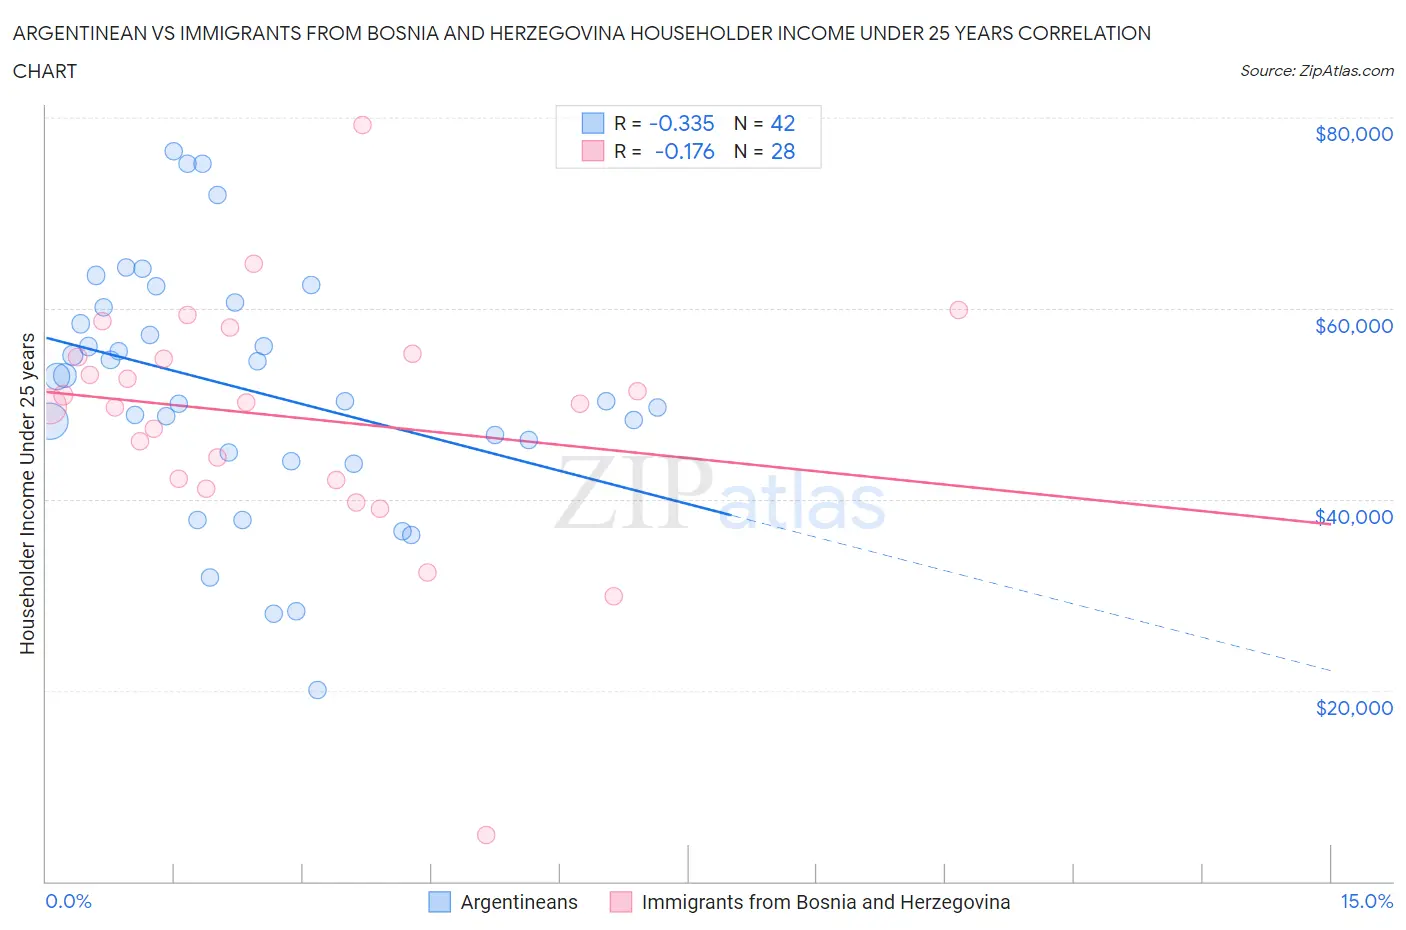 Argentinean vs Immigrants from Bosnia and Herzegovina Householder Income Under 25 years